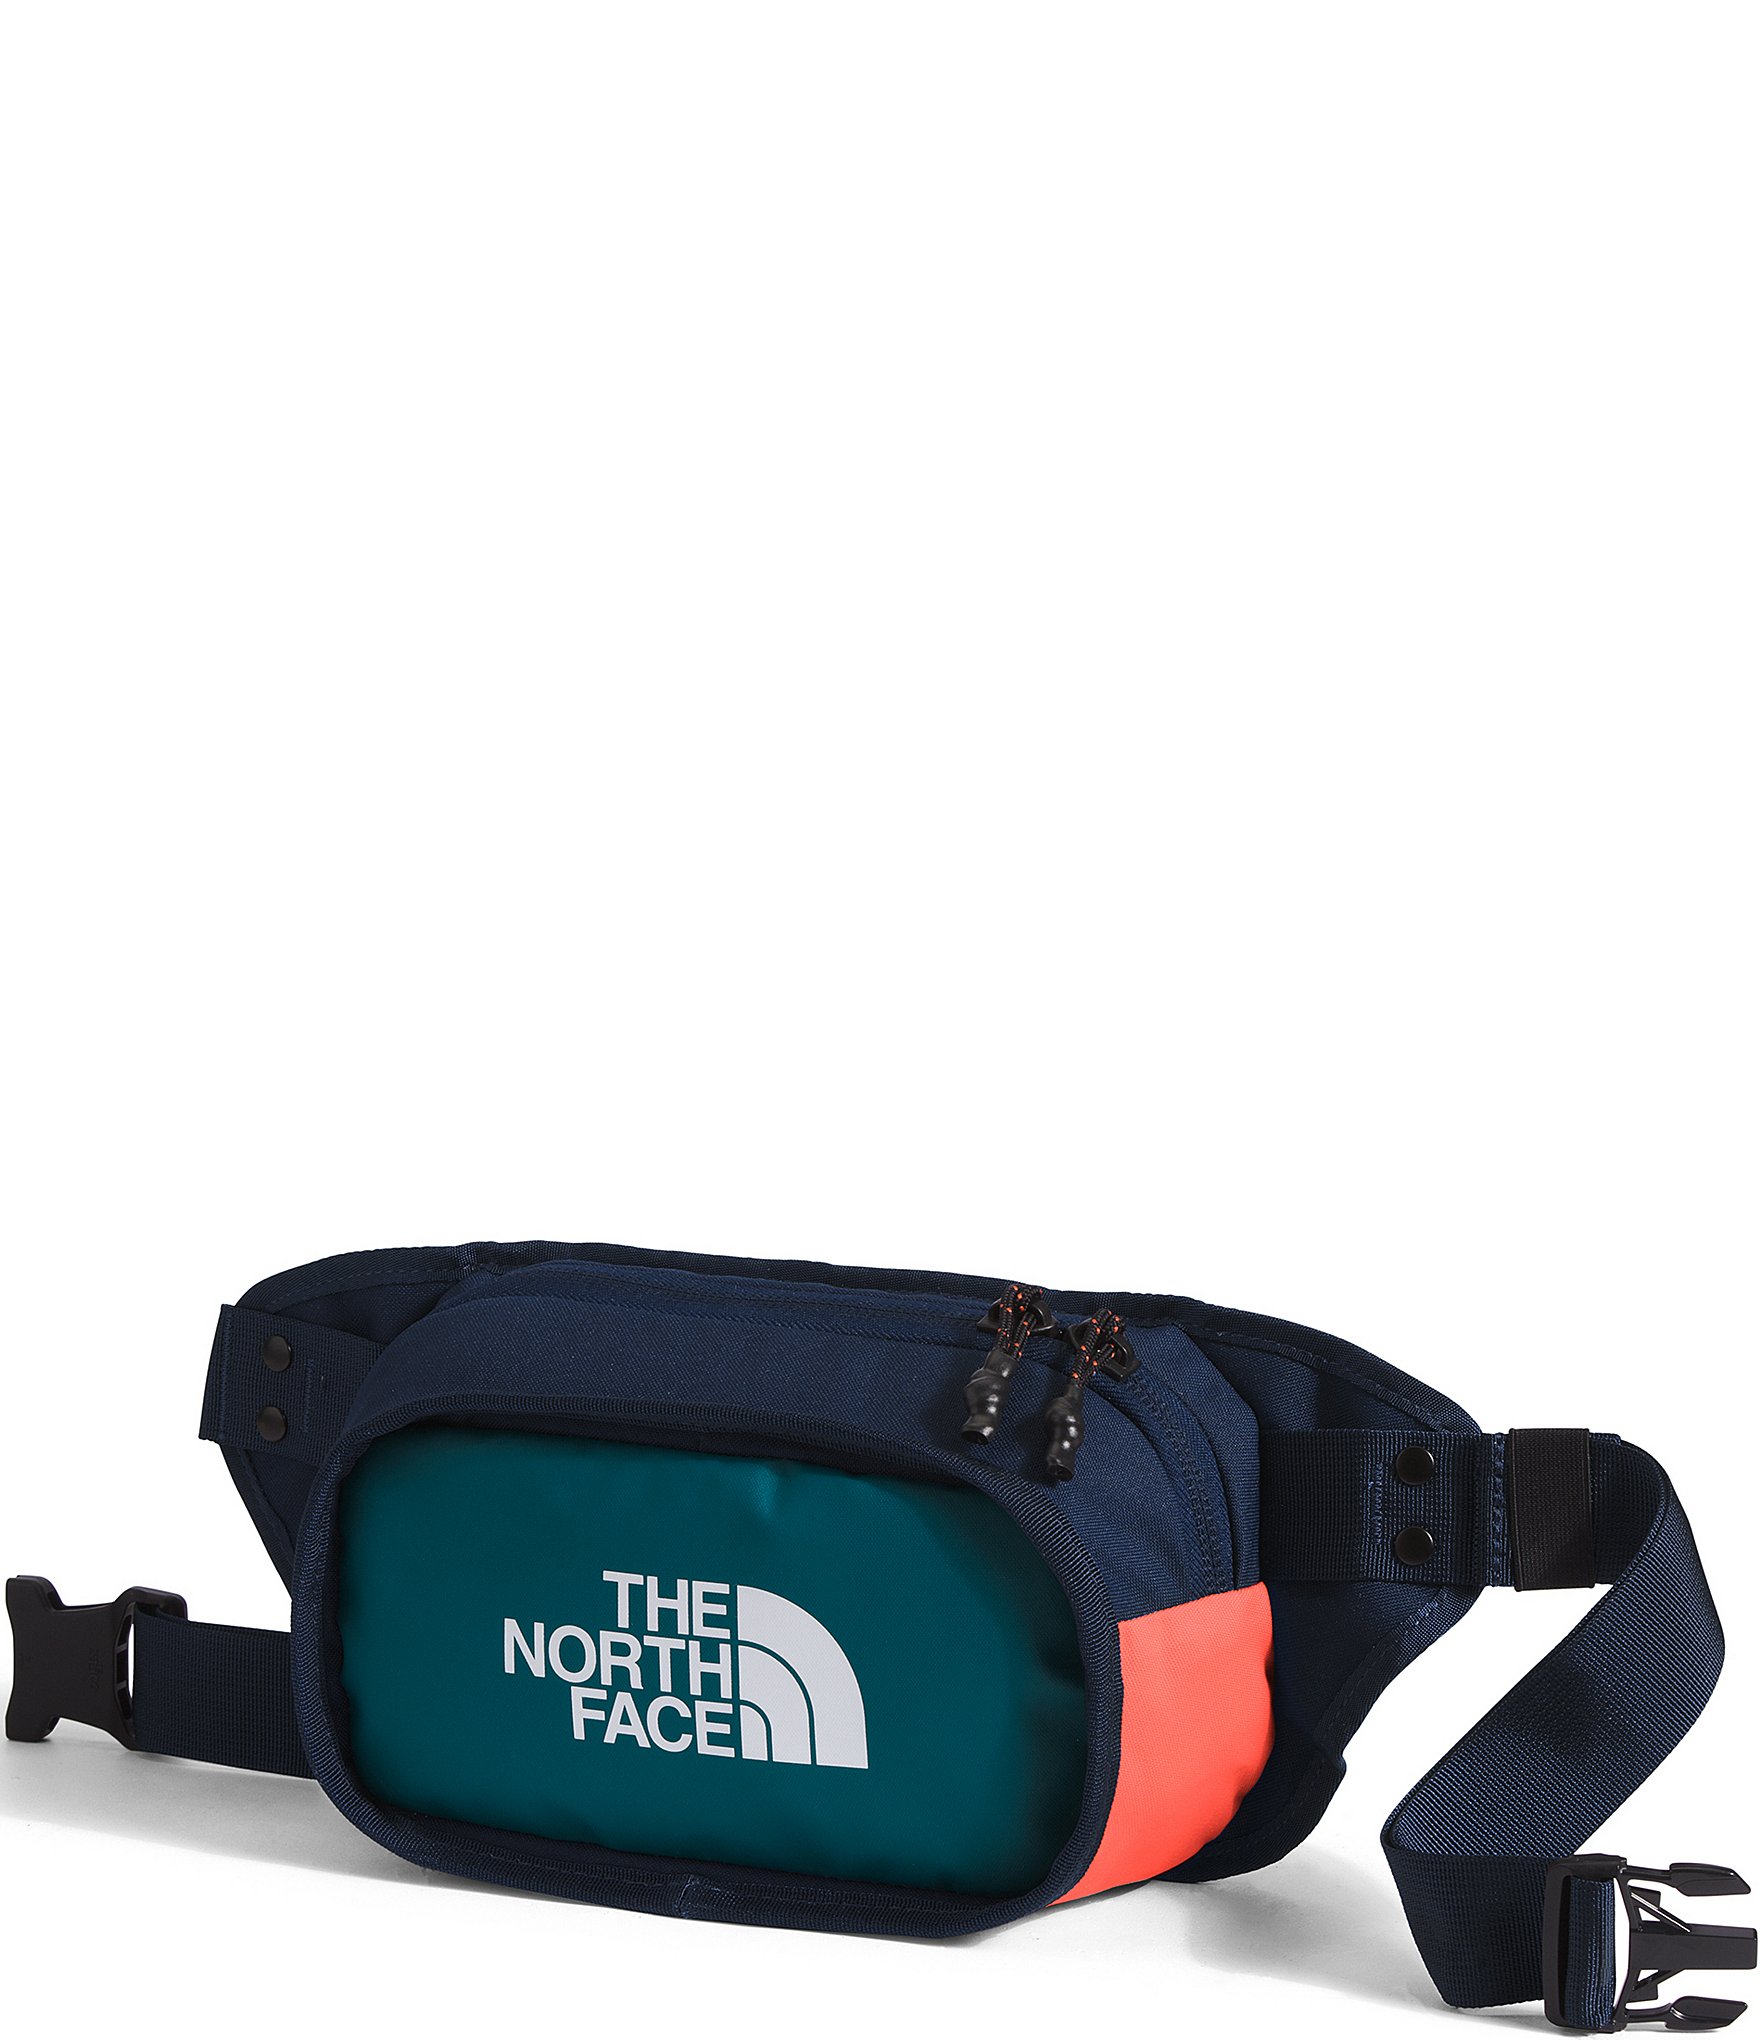 The North Face Explore Hip Pack | Dillard's